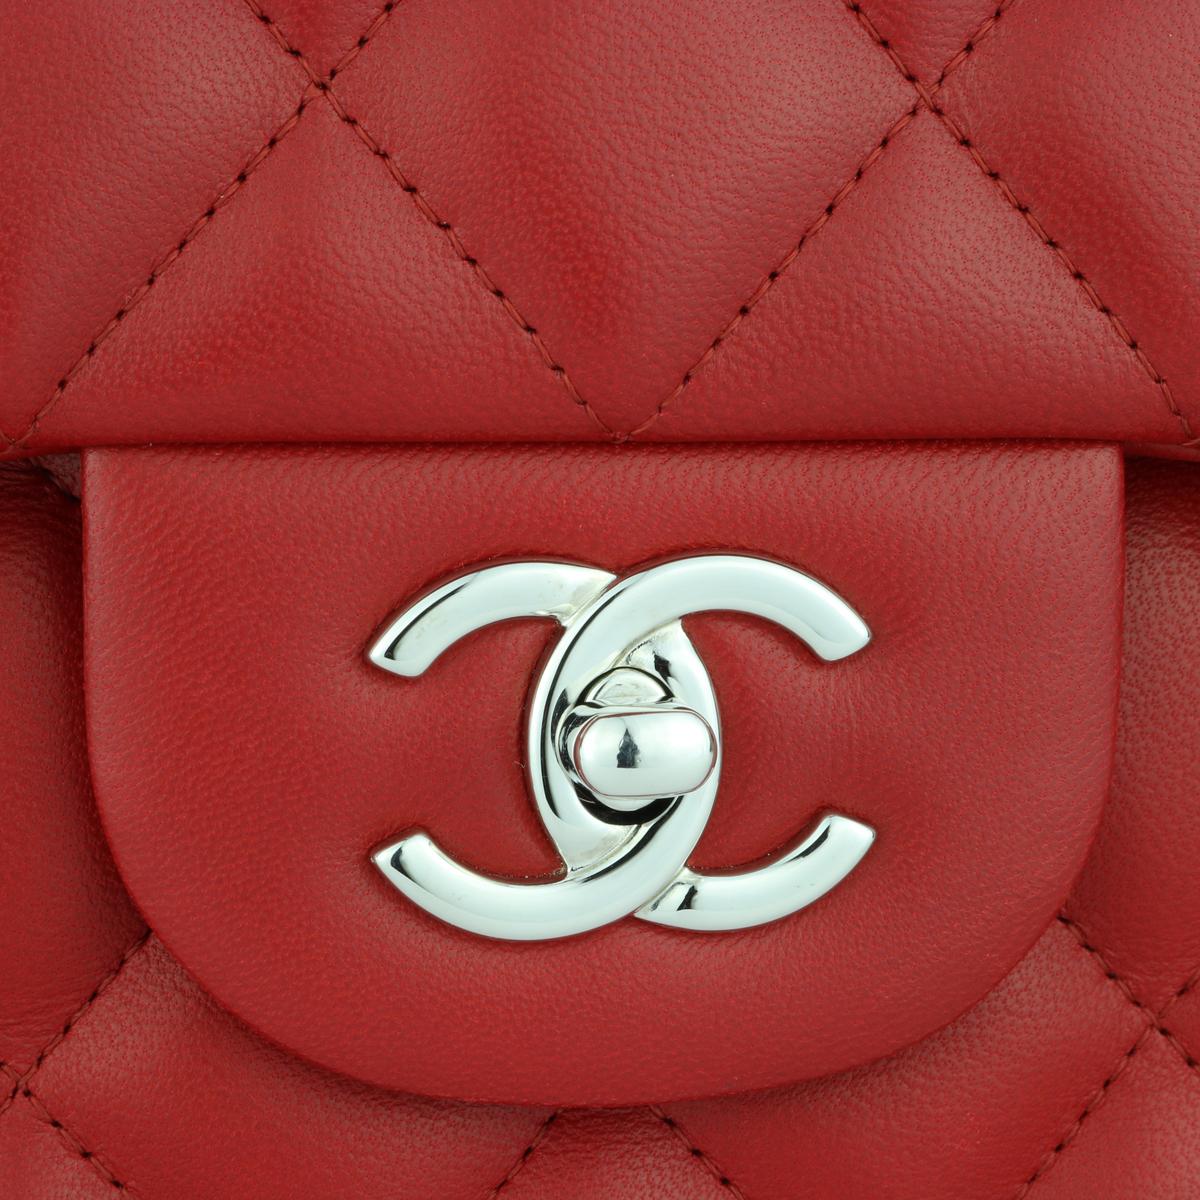 Authentic CHANEL Classic Double Flap Jumbo Bag Red Lambskin with Silver Hardware 2013.

This stunning bag is in mint condition, the bag still holds its original shape, and the hardware is still very shiny. Leather still smells fresh as if